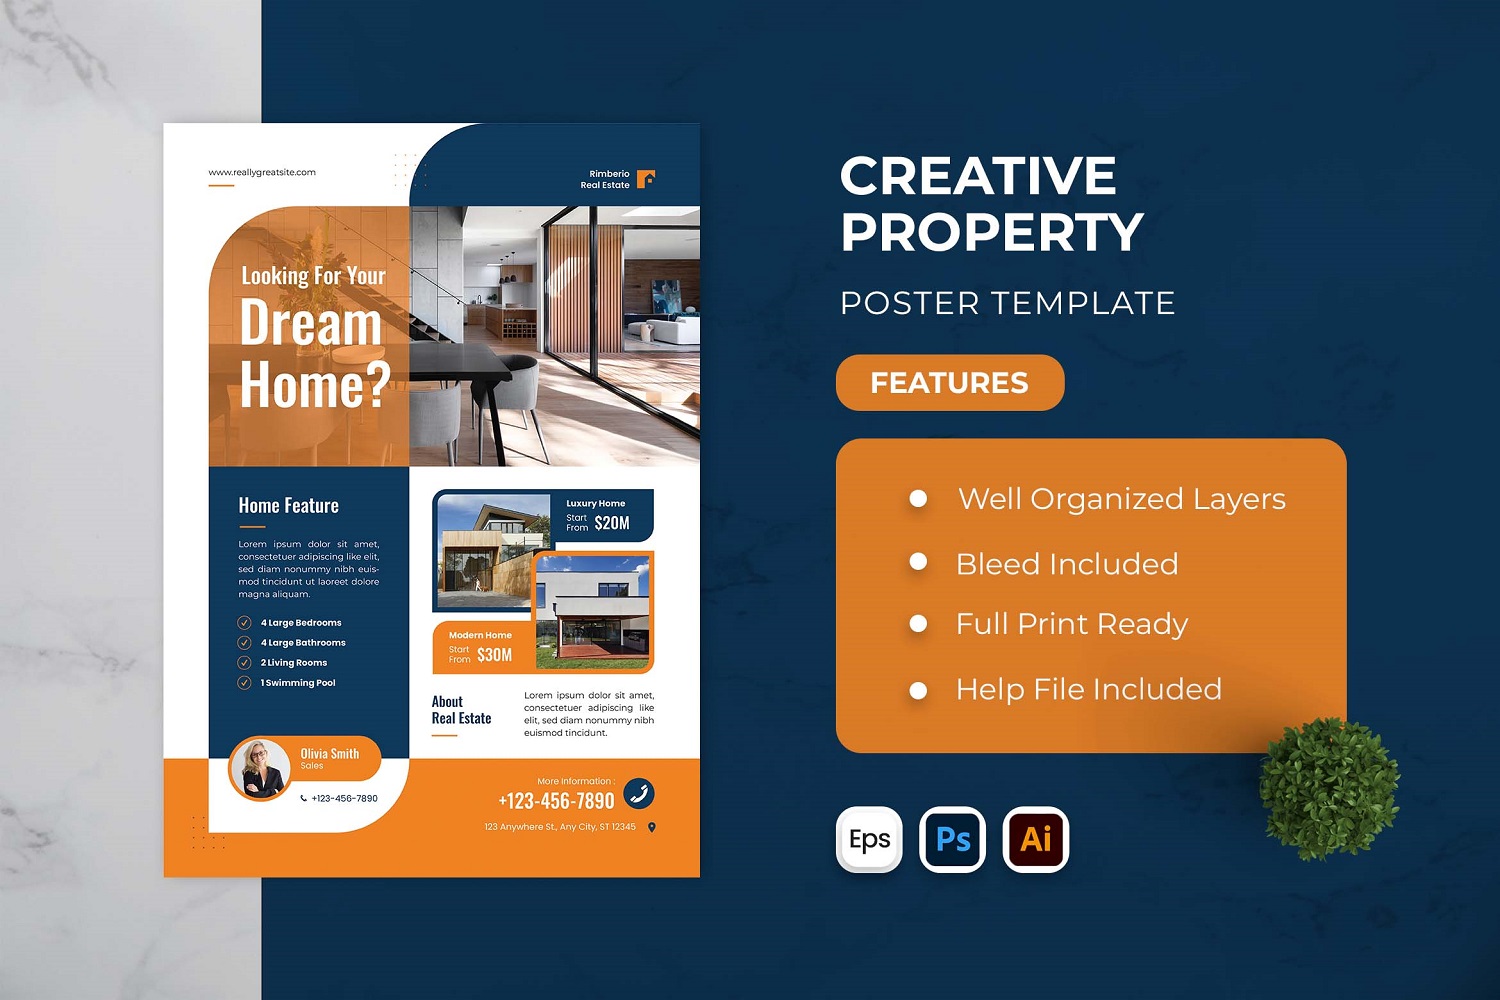 Creative Property Poster Template